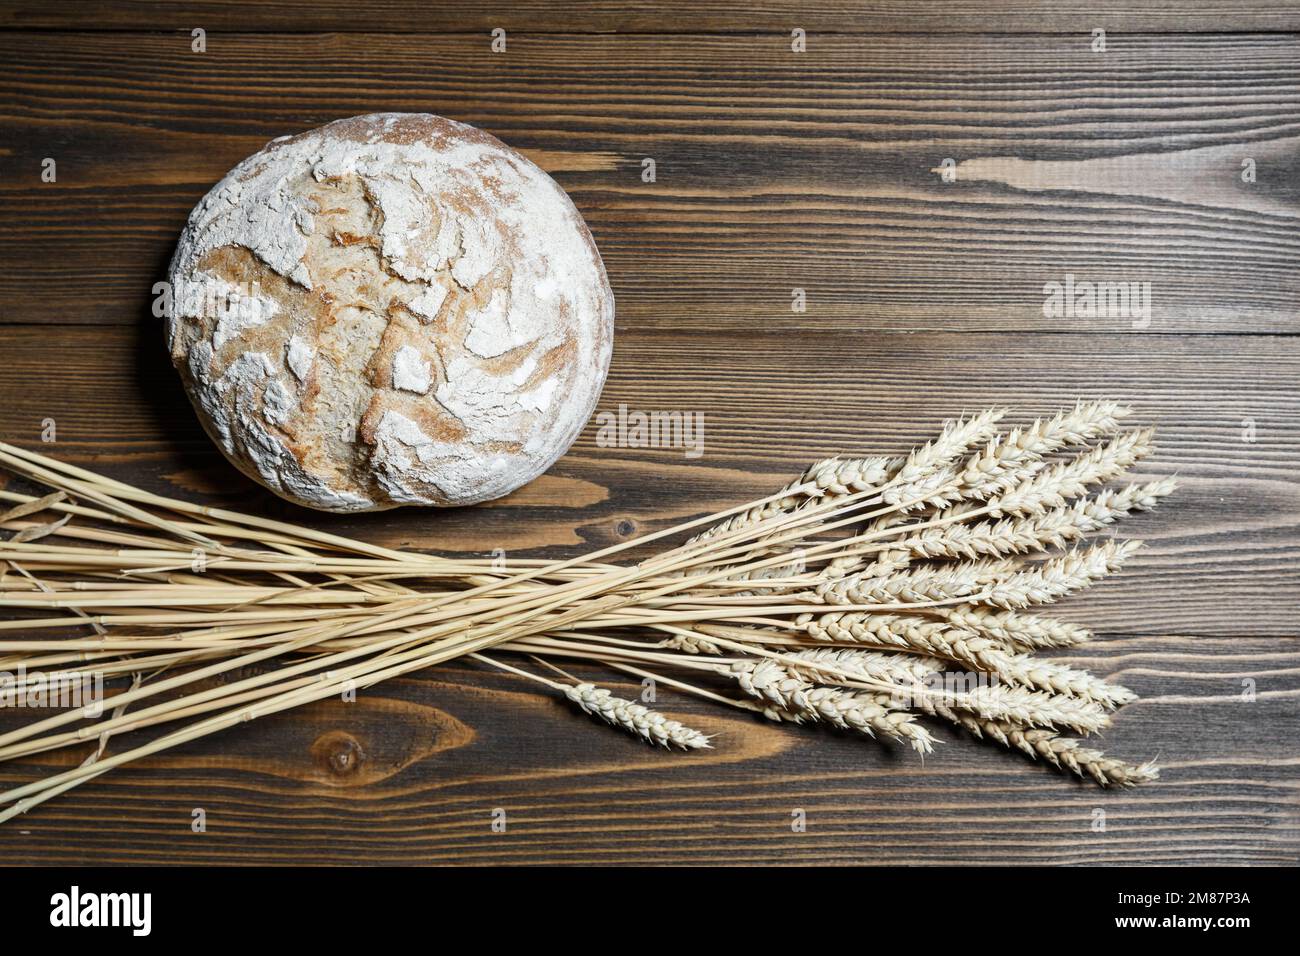 Fresh baked bread loaf and wheat ears lying on a wooden background. Food provision and production concept. Stock Photo